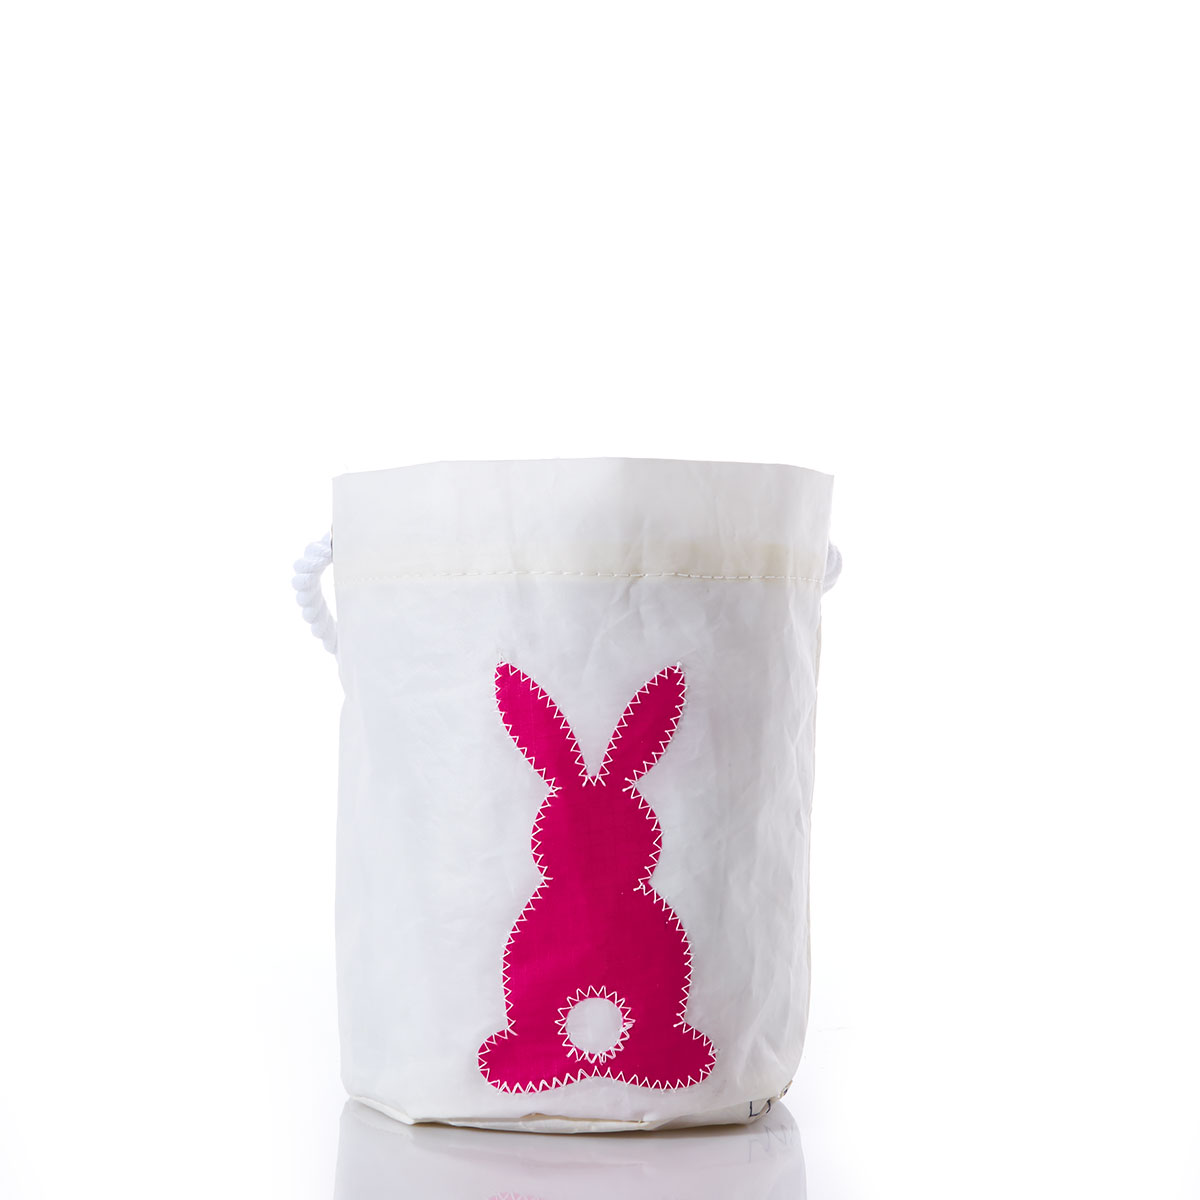 a bright pink silhouette of bunny with a white circle tail on a white recycled sail cloth bucket bag with a white rope handle